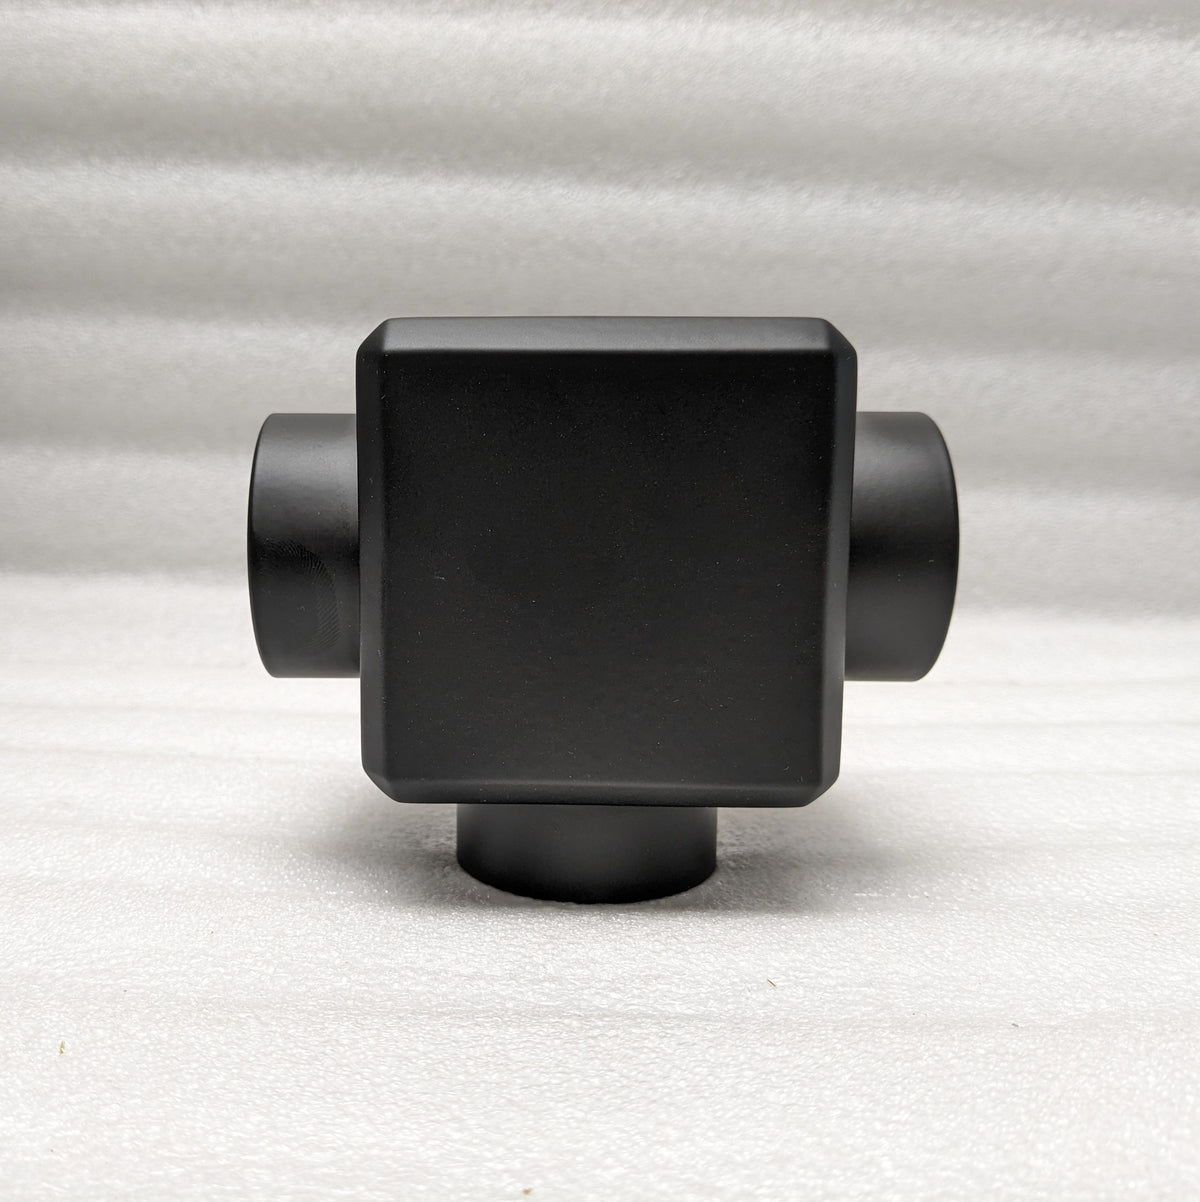 Cubical Tee for 2" Tubing Cubicals, Components for 2" Od Tubing Matte-Black-Powder-Coated-Finish Trade Diversified